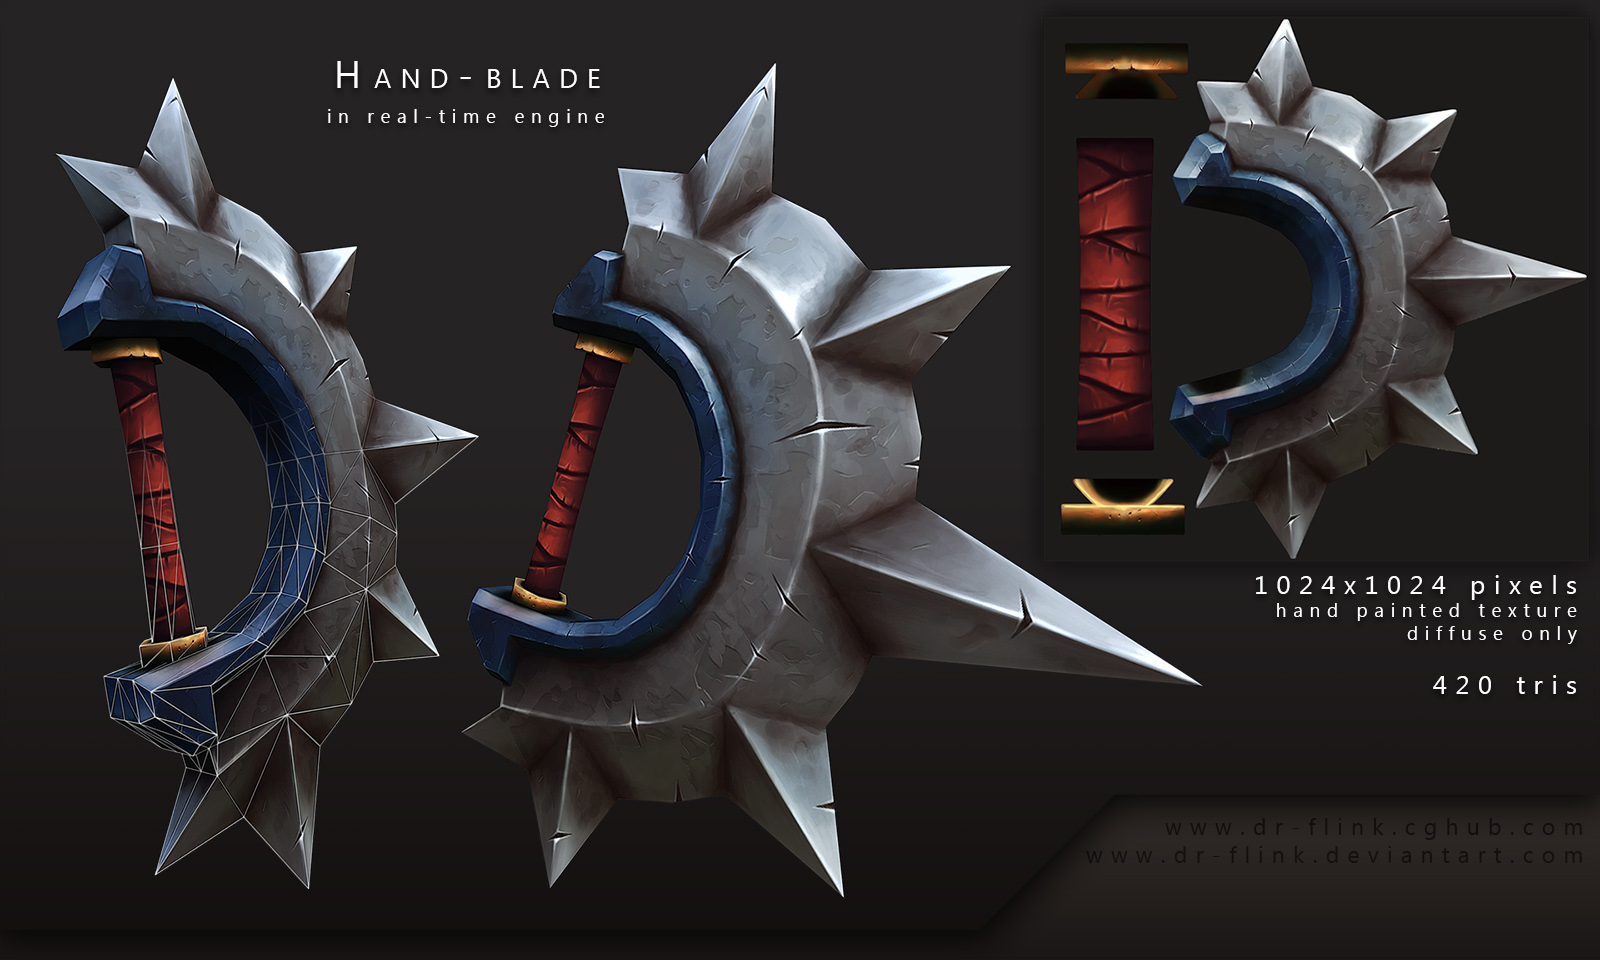 hand_blade_diffuse_only_by_dr_flink-d6t0mhs.jpg